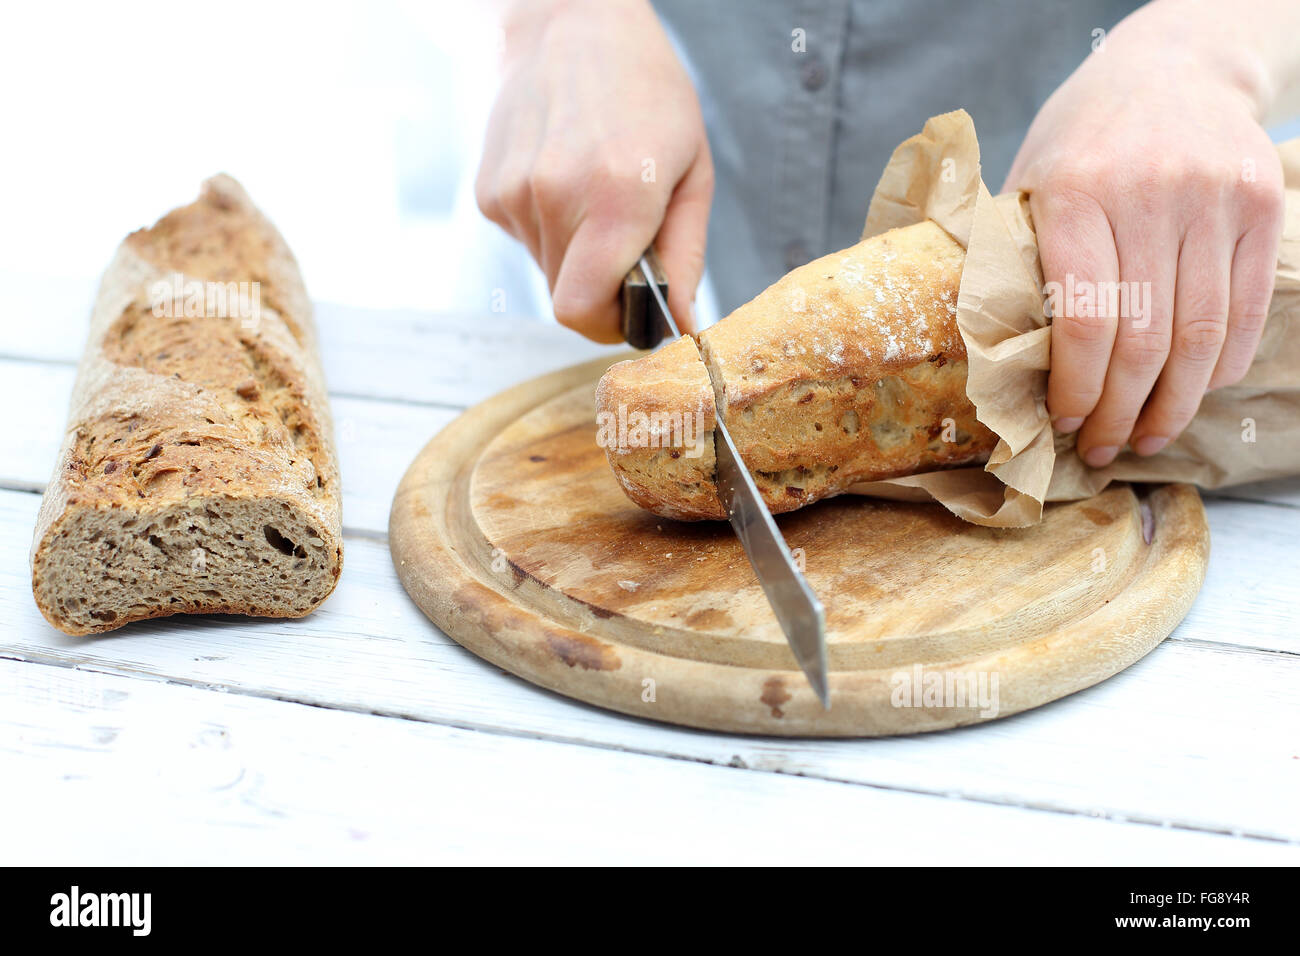 https://c8.alamy.com/comp/FG8Y4R/woman-hands-cutting-bread-on-the-kitchen-counter-baguette-slicing-FG8Y4R.jpg